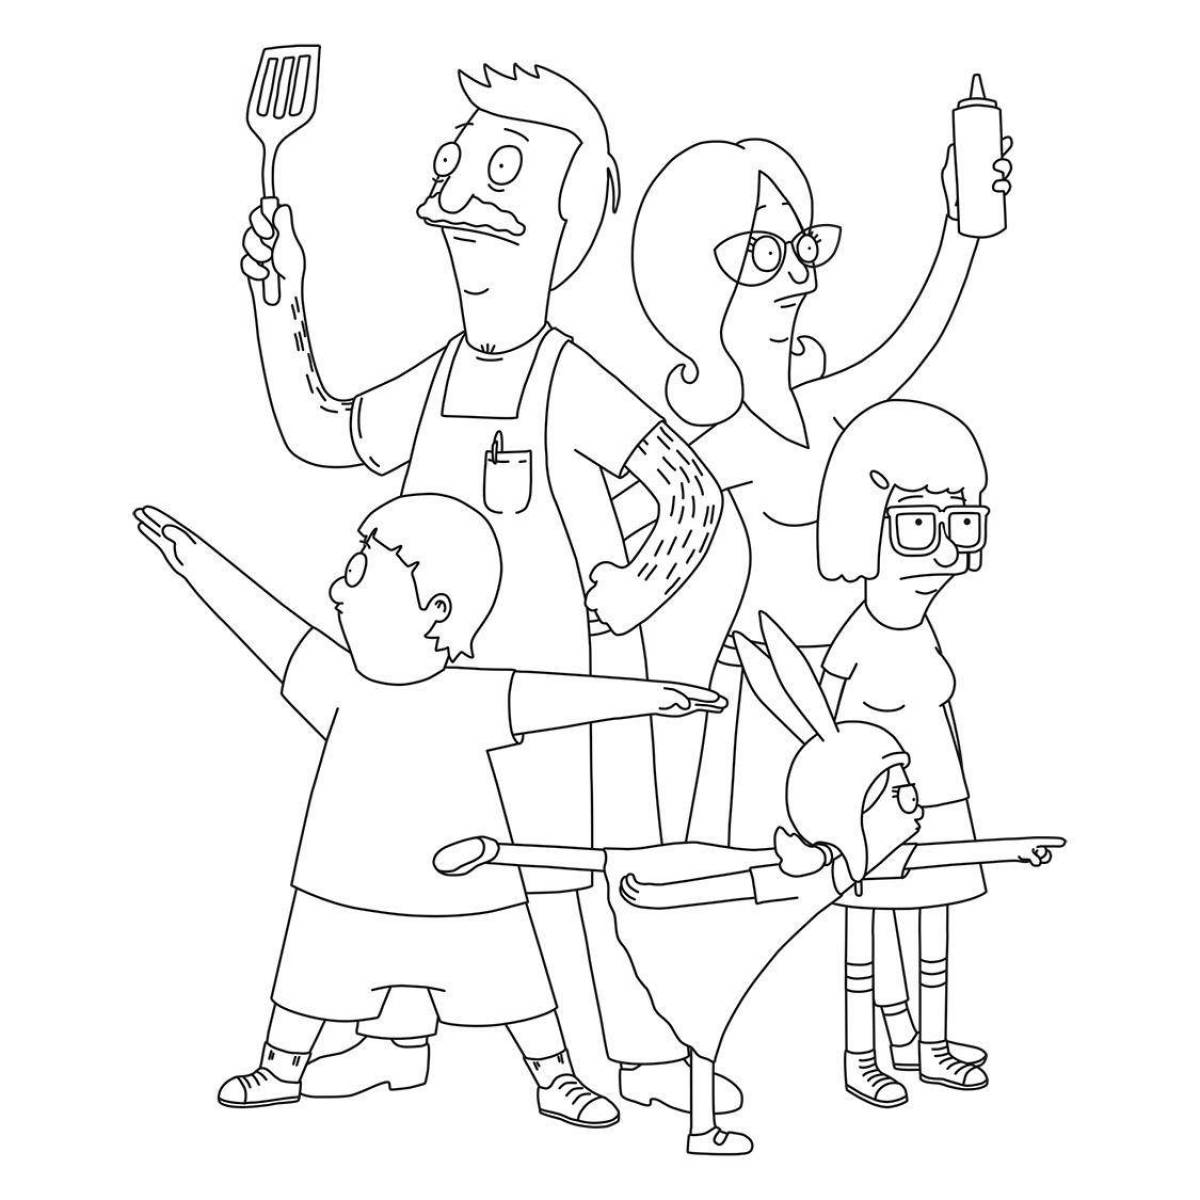 Coloring friendly metal family